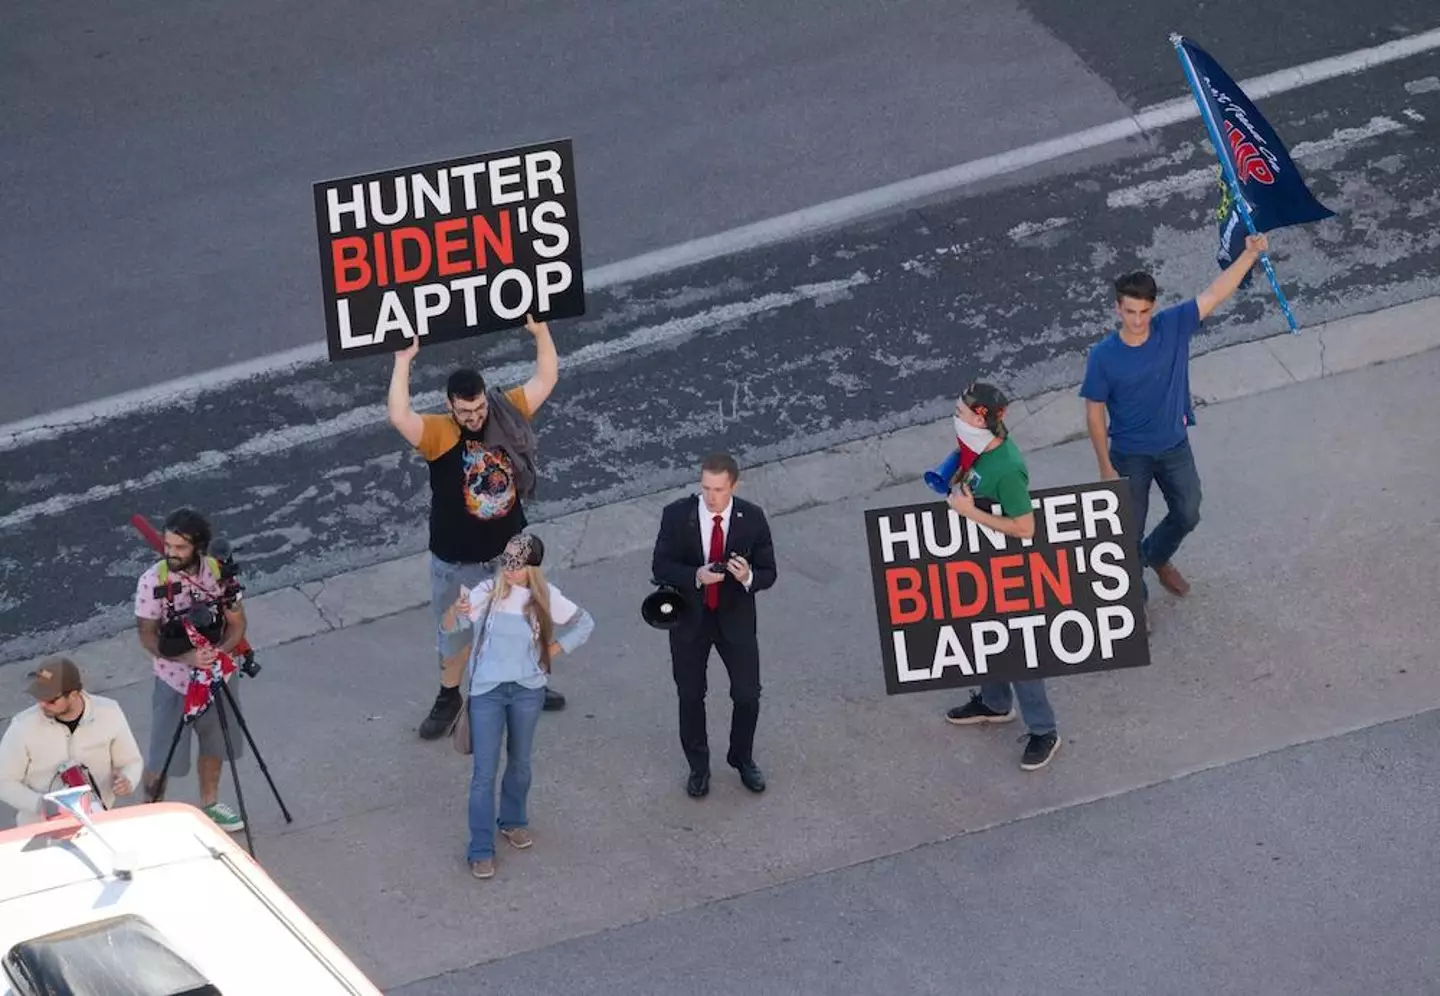 Donald Trump supporters with 'Hunter Biden laptop' signs.